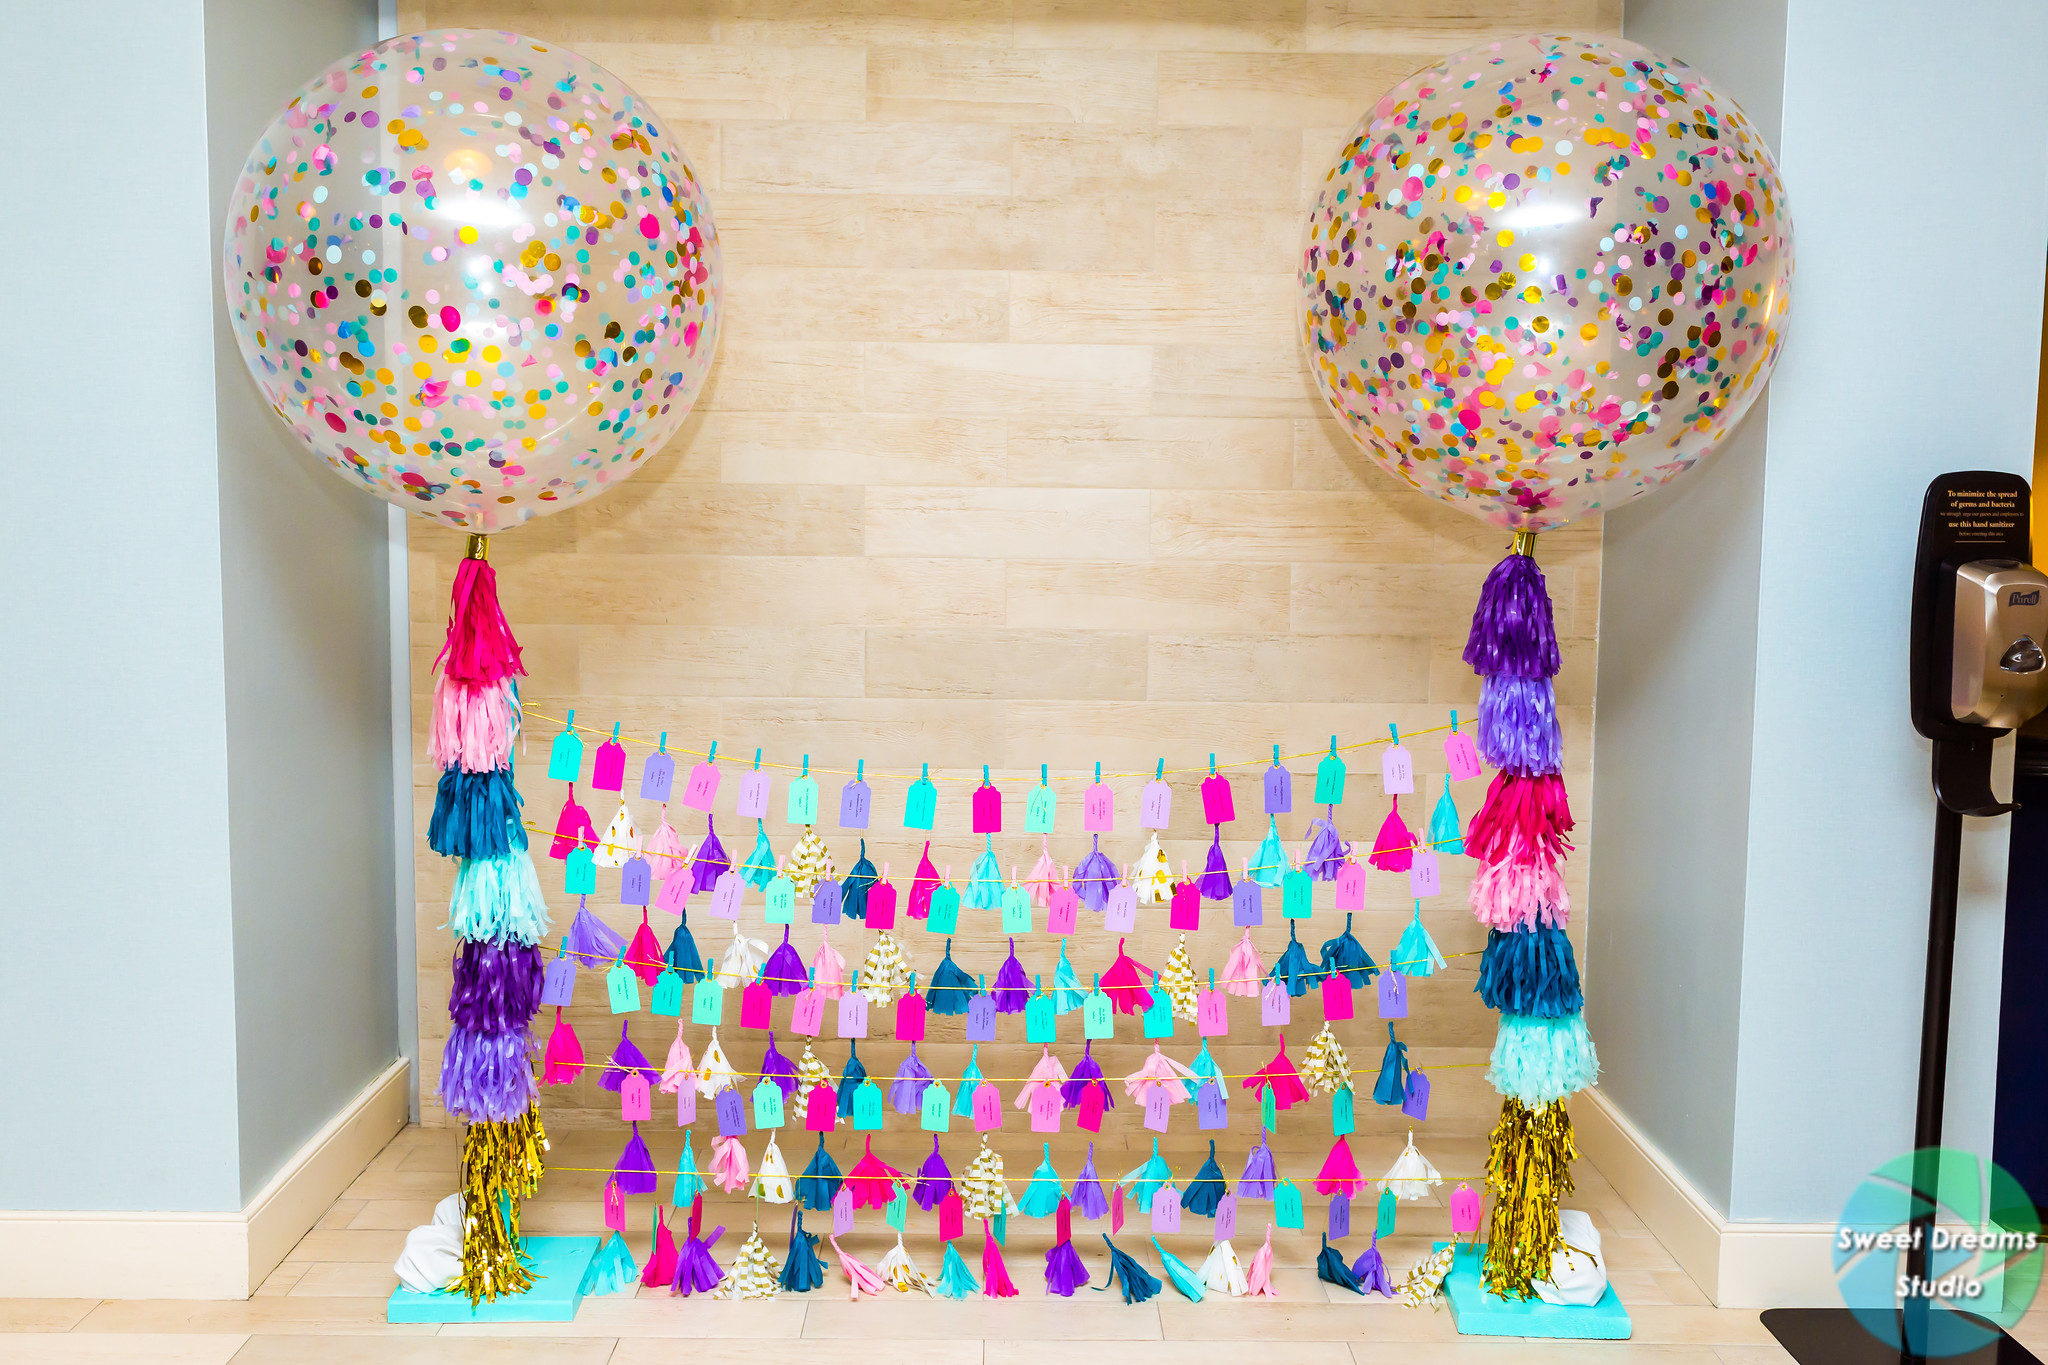 Liv it Up tasseled balloon escort card holder at Olivia's colorful, jewel-toned, balloon-filled Bat Mitzvah party at Hyatt Regency Dulles. Pink, purple, teal, turquoise and gold. | Pop Color Events | Adding a pop of color to Bar & Bat Mitzvahs in DC, MD & VA | Photo by Sweet Dreams Studios